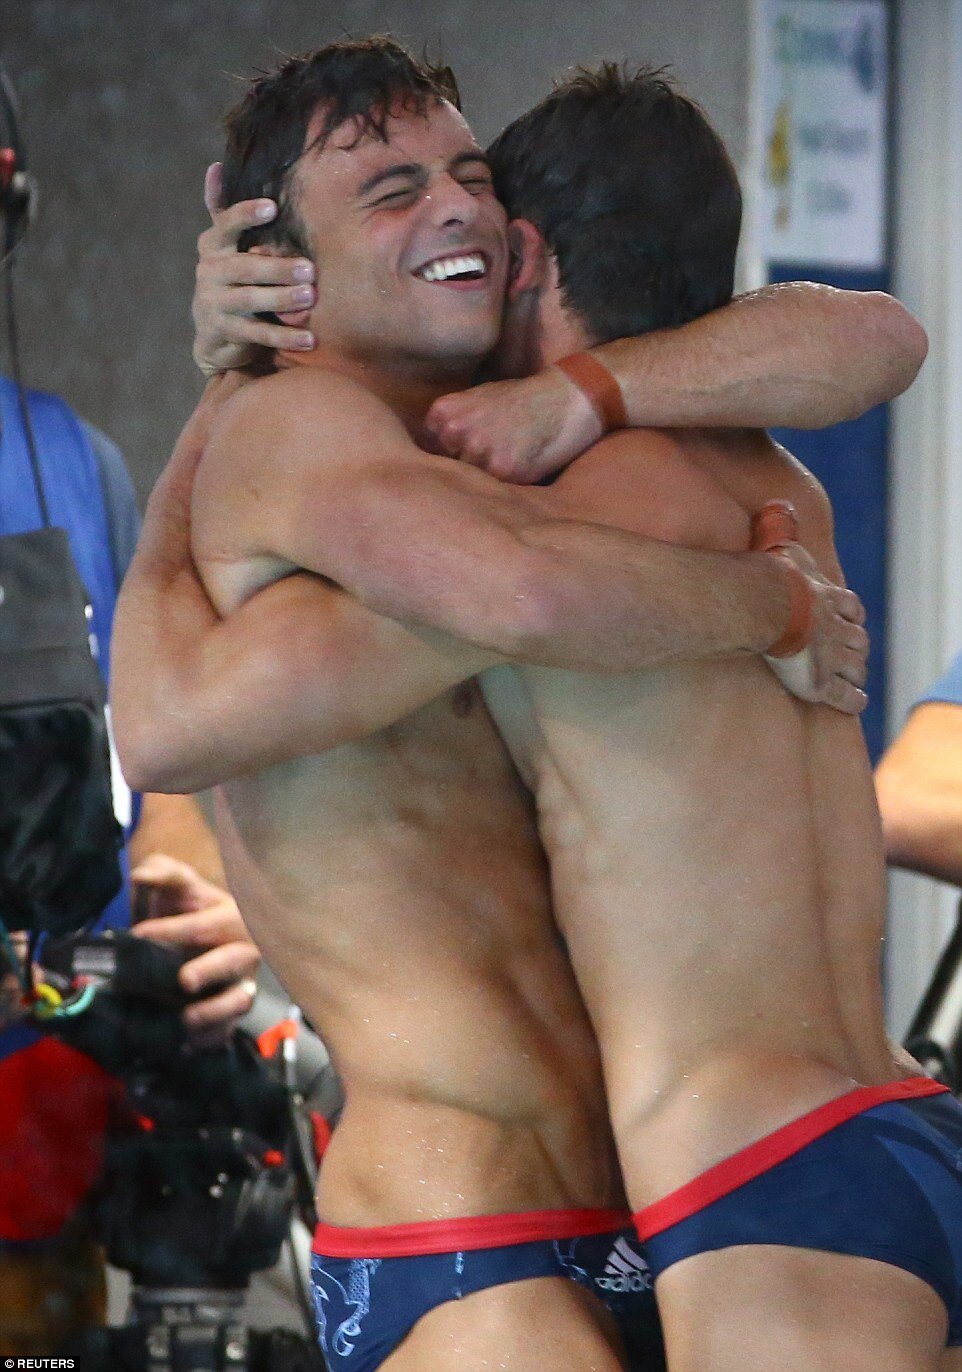 3703bc9600000578-3729977-tom_daley_and_diving_partner_daniel_goodfellow_right_jumped_into-a-68_1470689002976